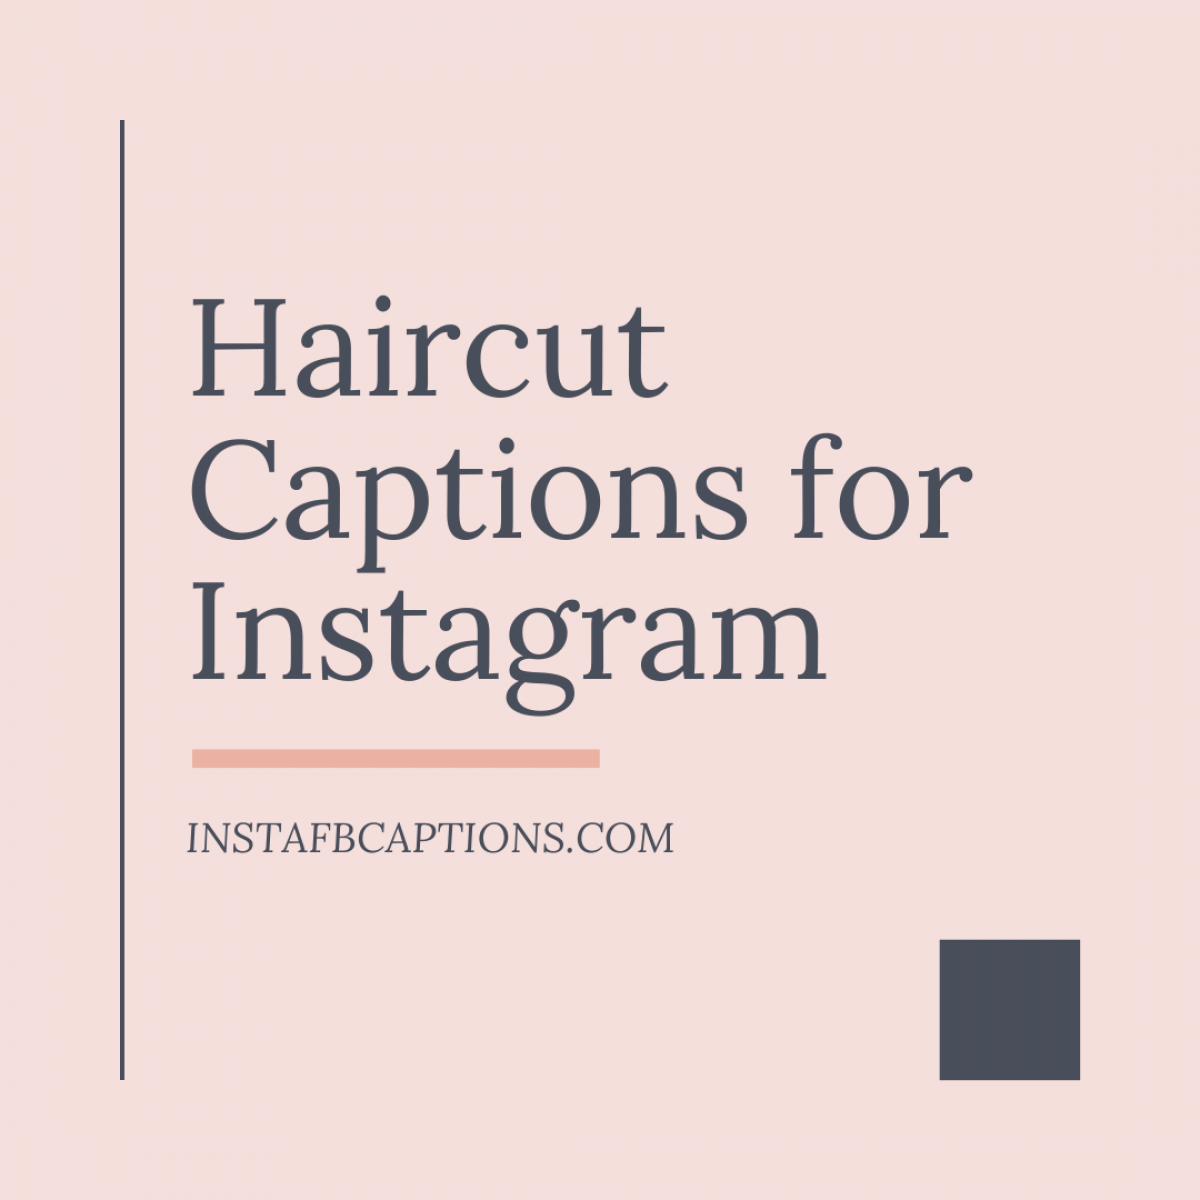 Latest] HAIRCUT Captions Quotes for Instagram in 2023